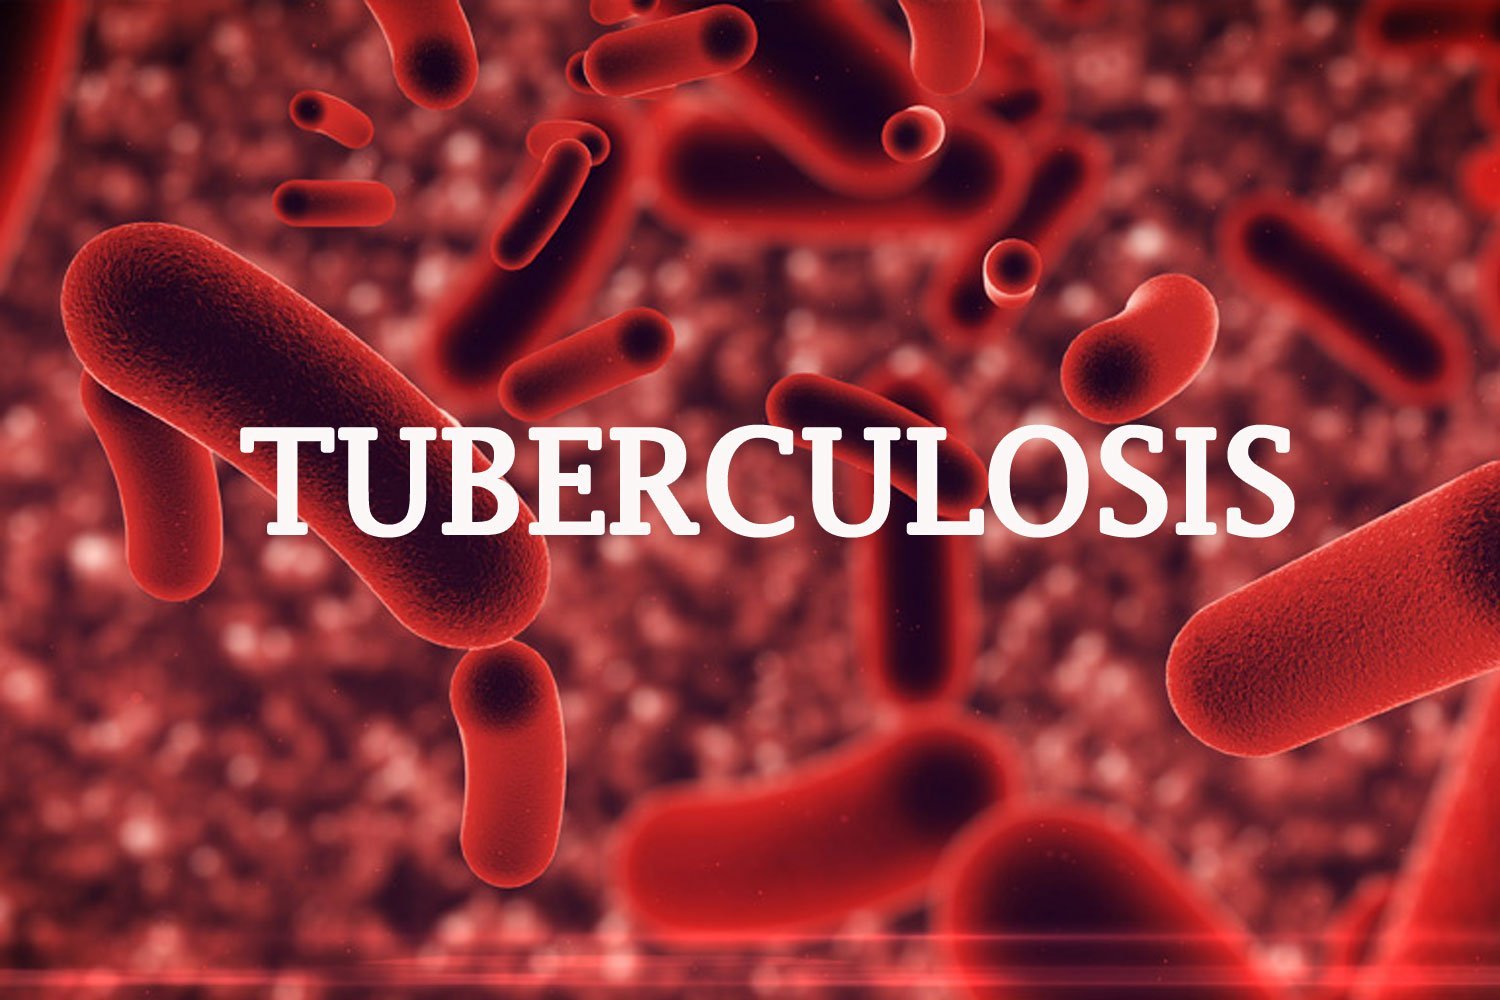 Tuberculosis not caused by witchcraft, poison - WHO